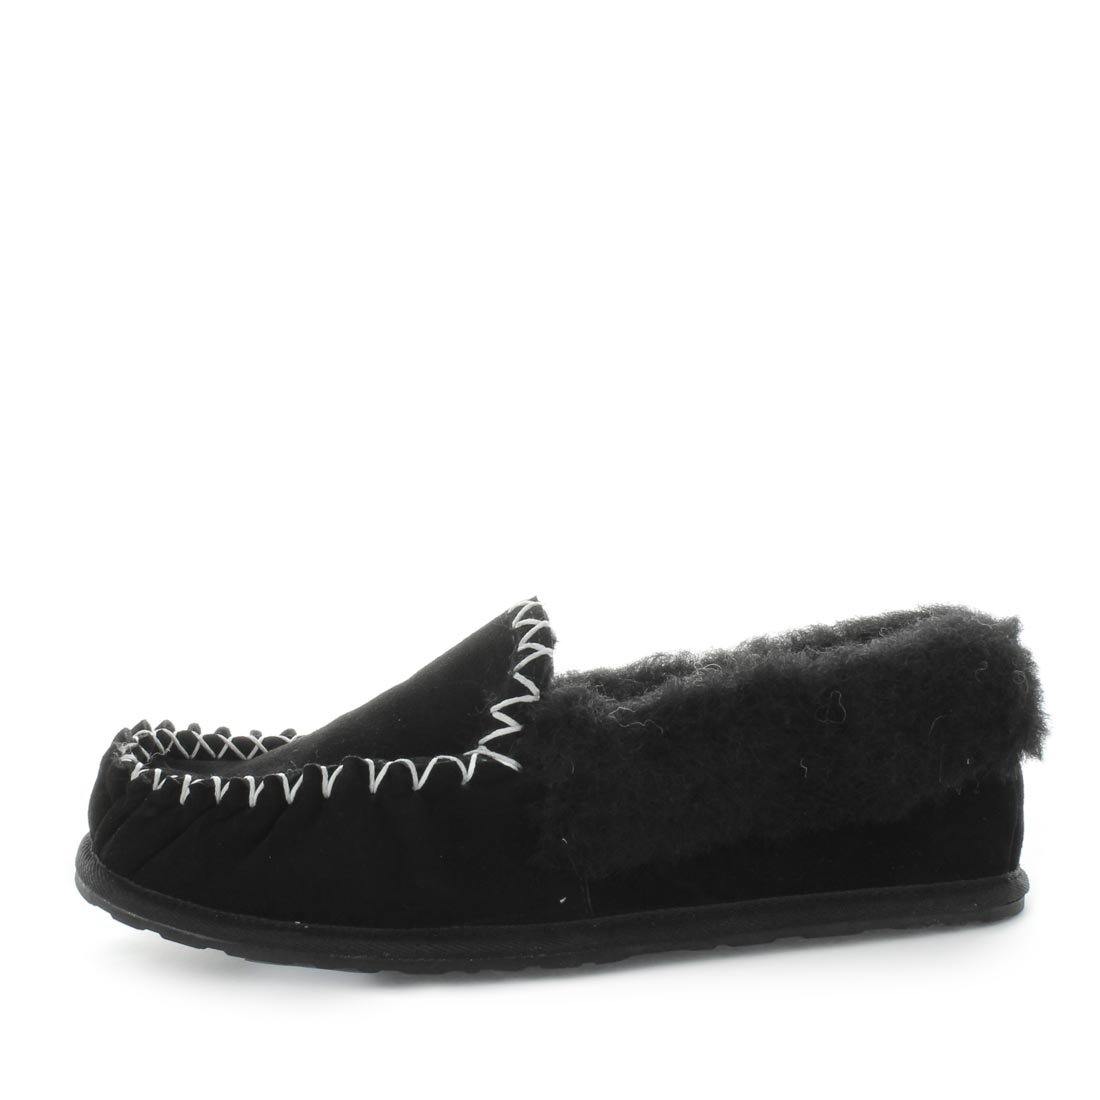 Mens slipper chums by just bee uggs, uggs boots - just bee slippers - mens slippers, moccasin slippers, wool slippers, 100% wool slippers.  (6535825915983)